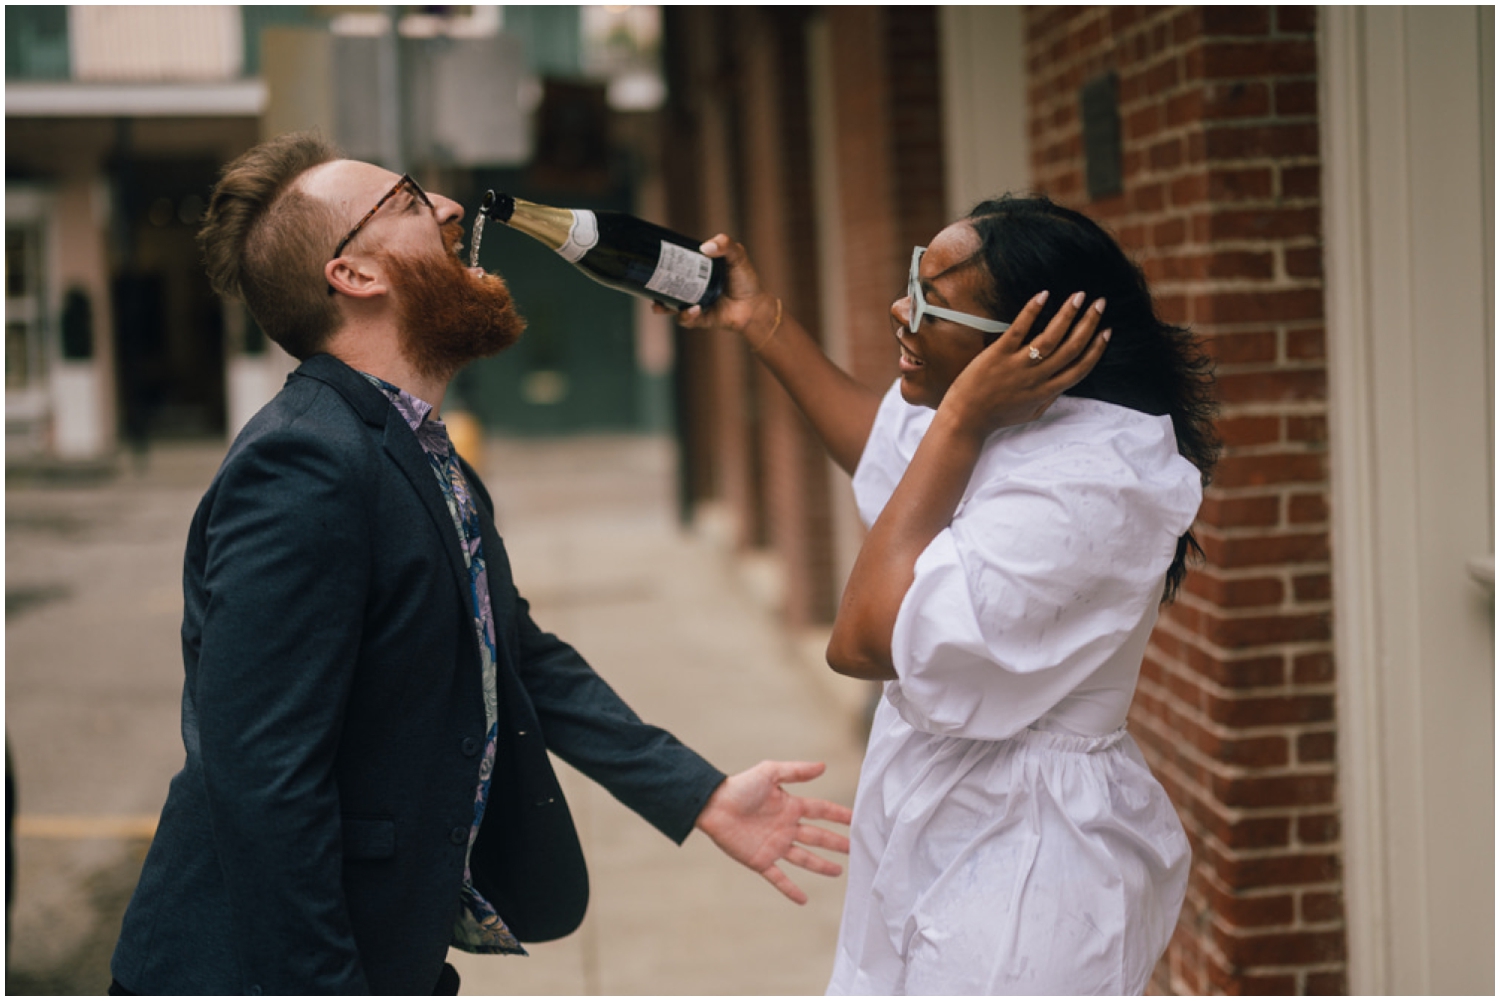 Paris pours champagne into Dan's mouth in front of a brick building in the French Quarter.